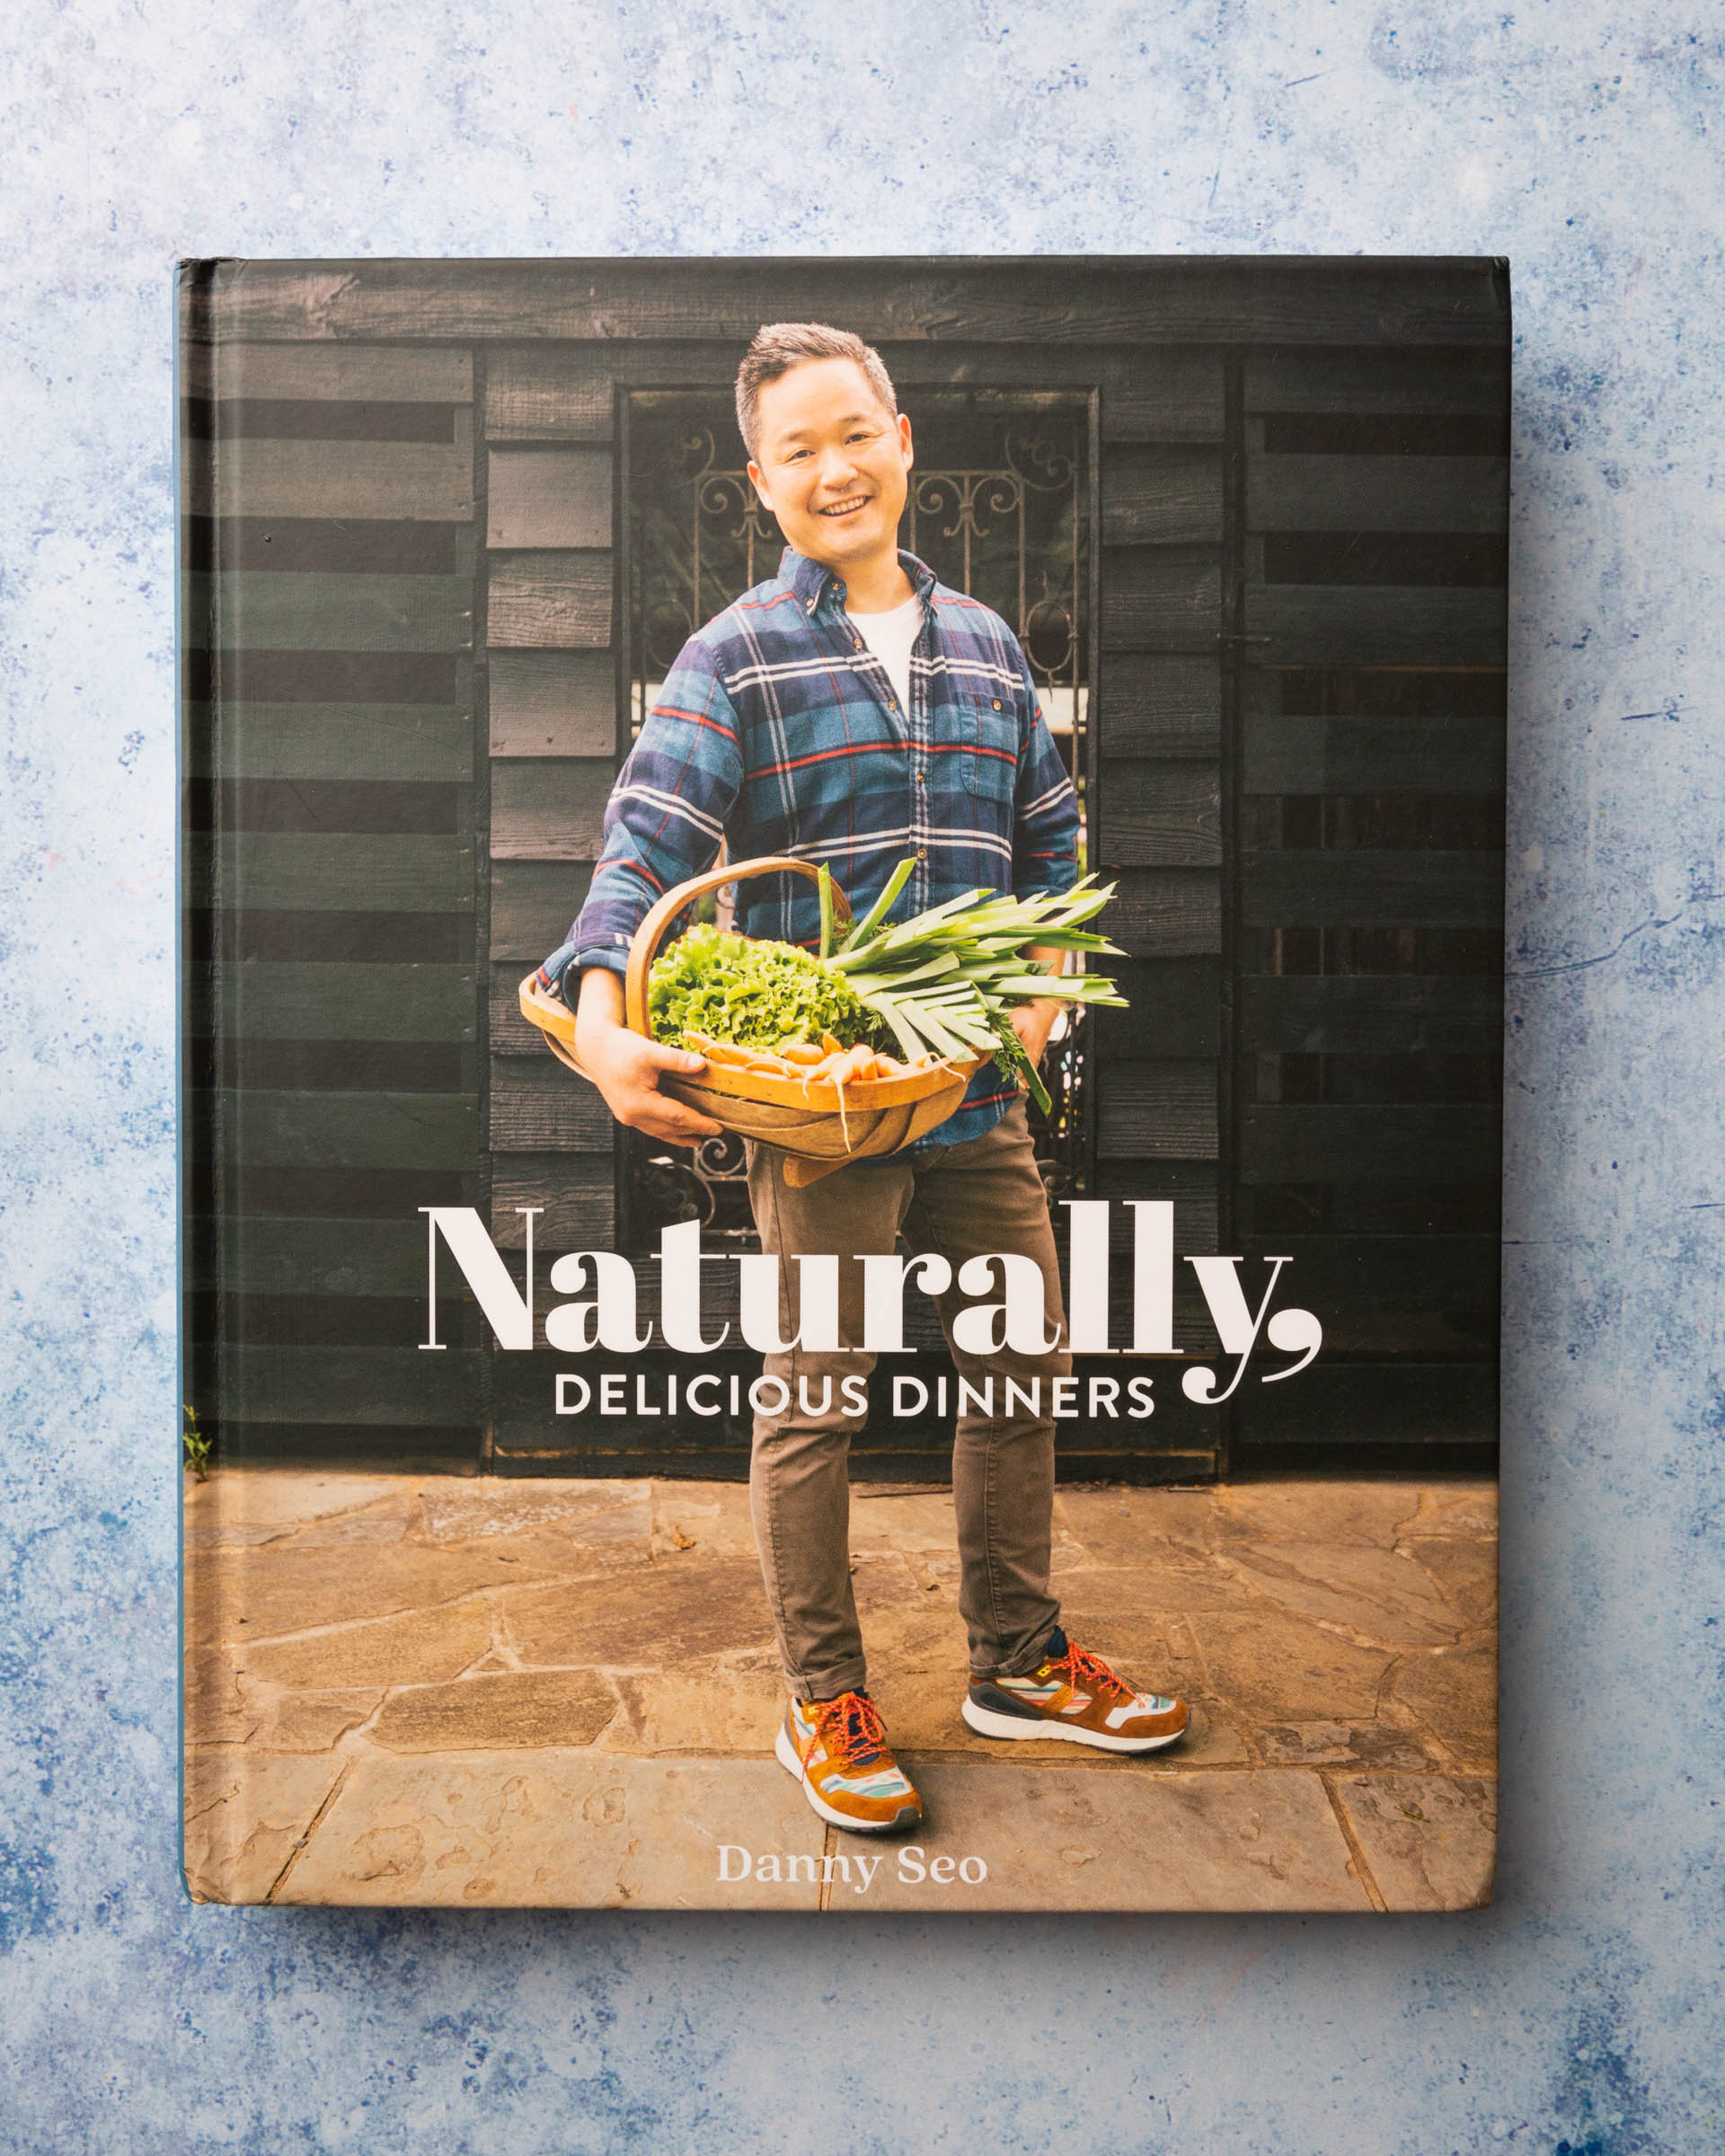 Danny Seo's Naturally, Delicious Dinners